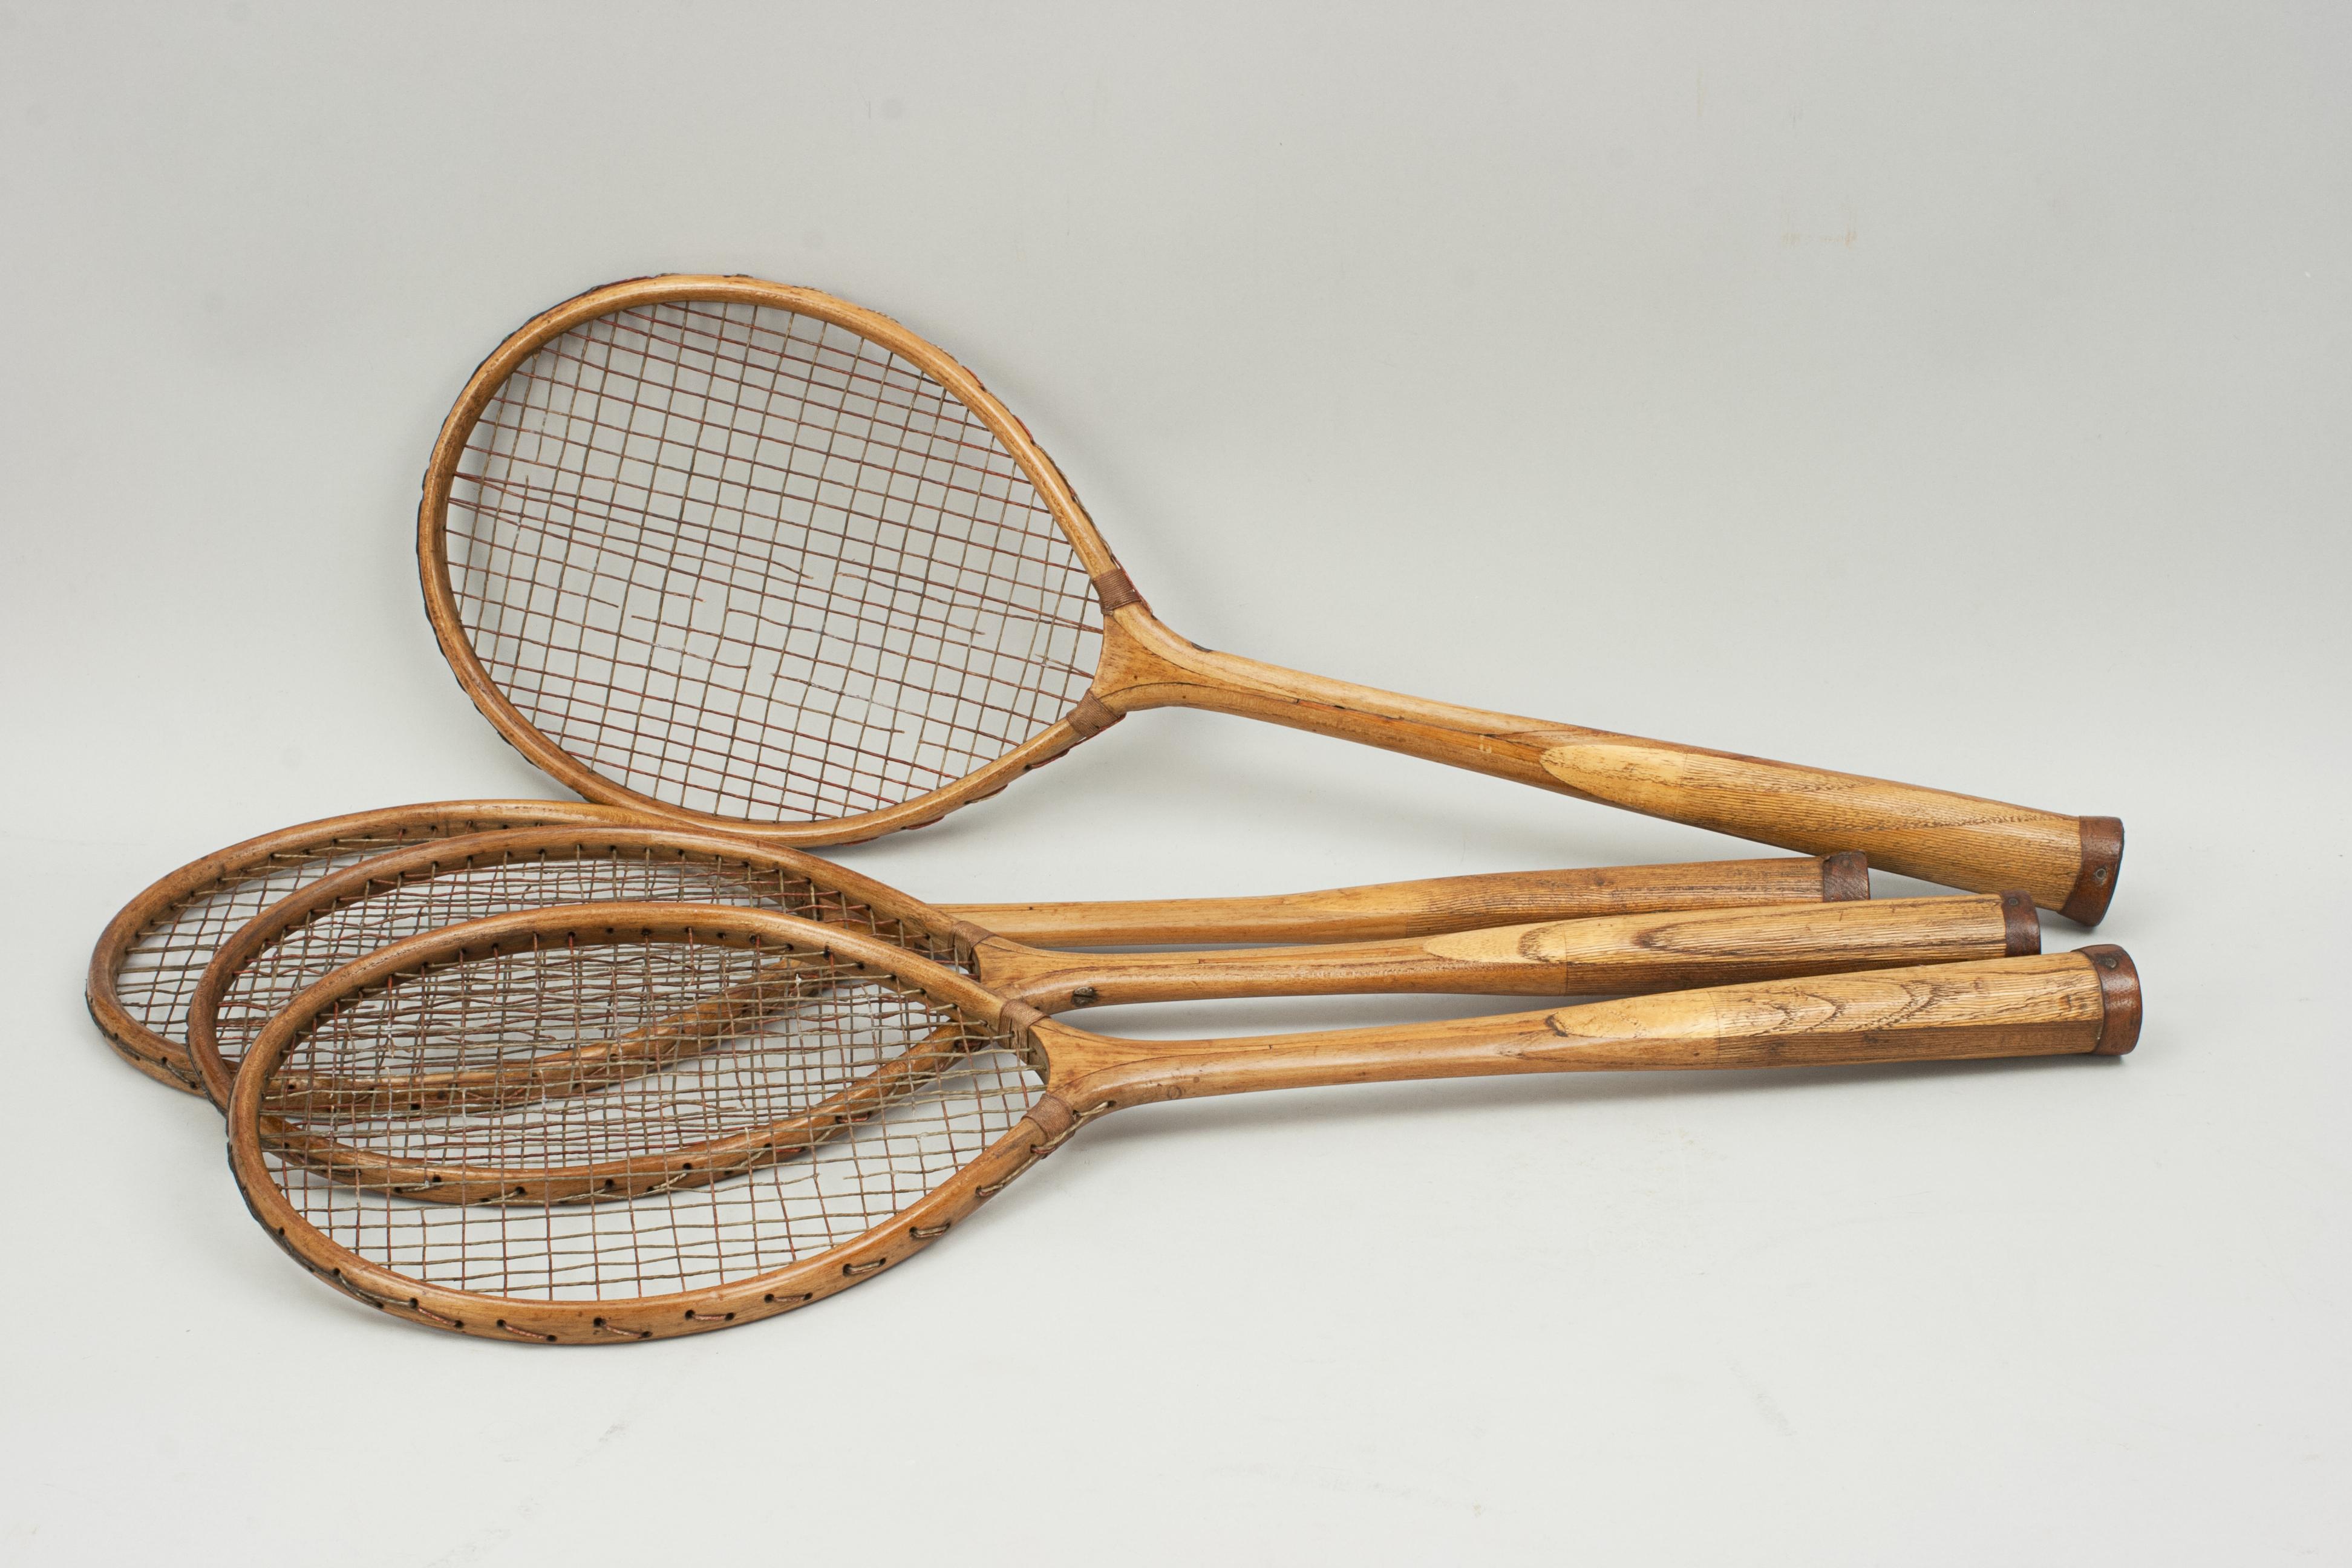 Four Wooden Badminton Rackets.
A nice set of four early 20th century wooden badminton rackets. The racquets have the original red and white stringing and leather butt caps, Although the stringing is damaged they are still very decorative. The maker